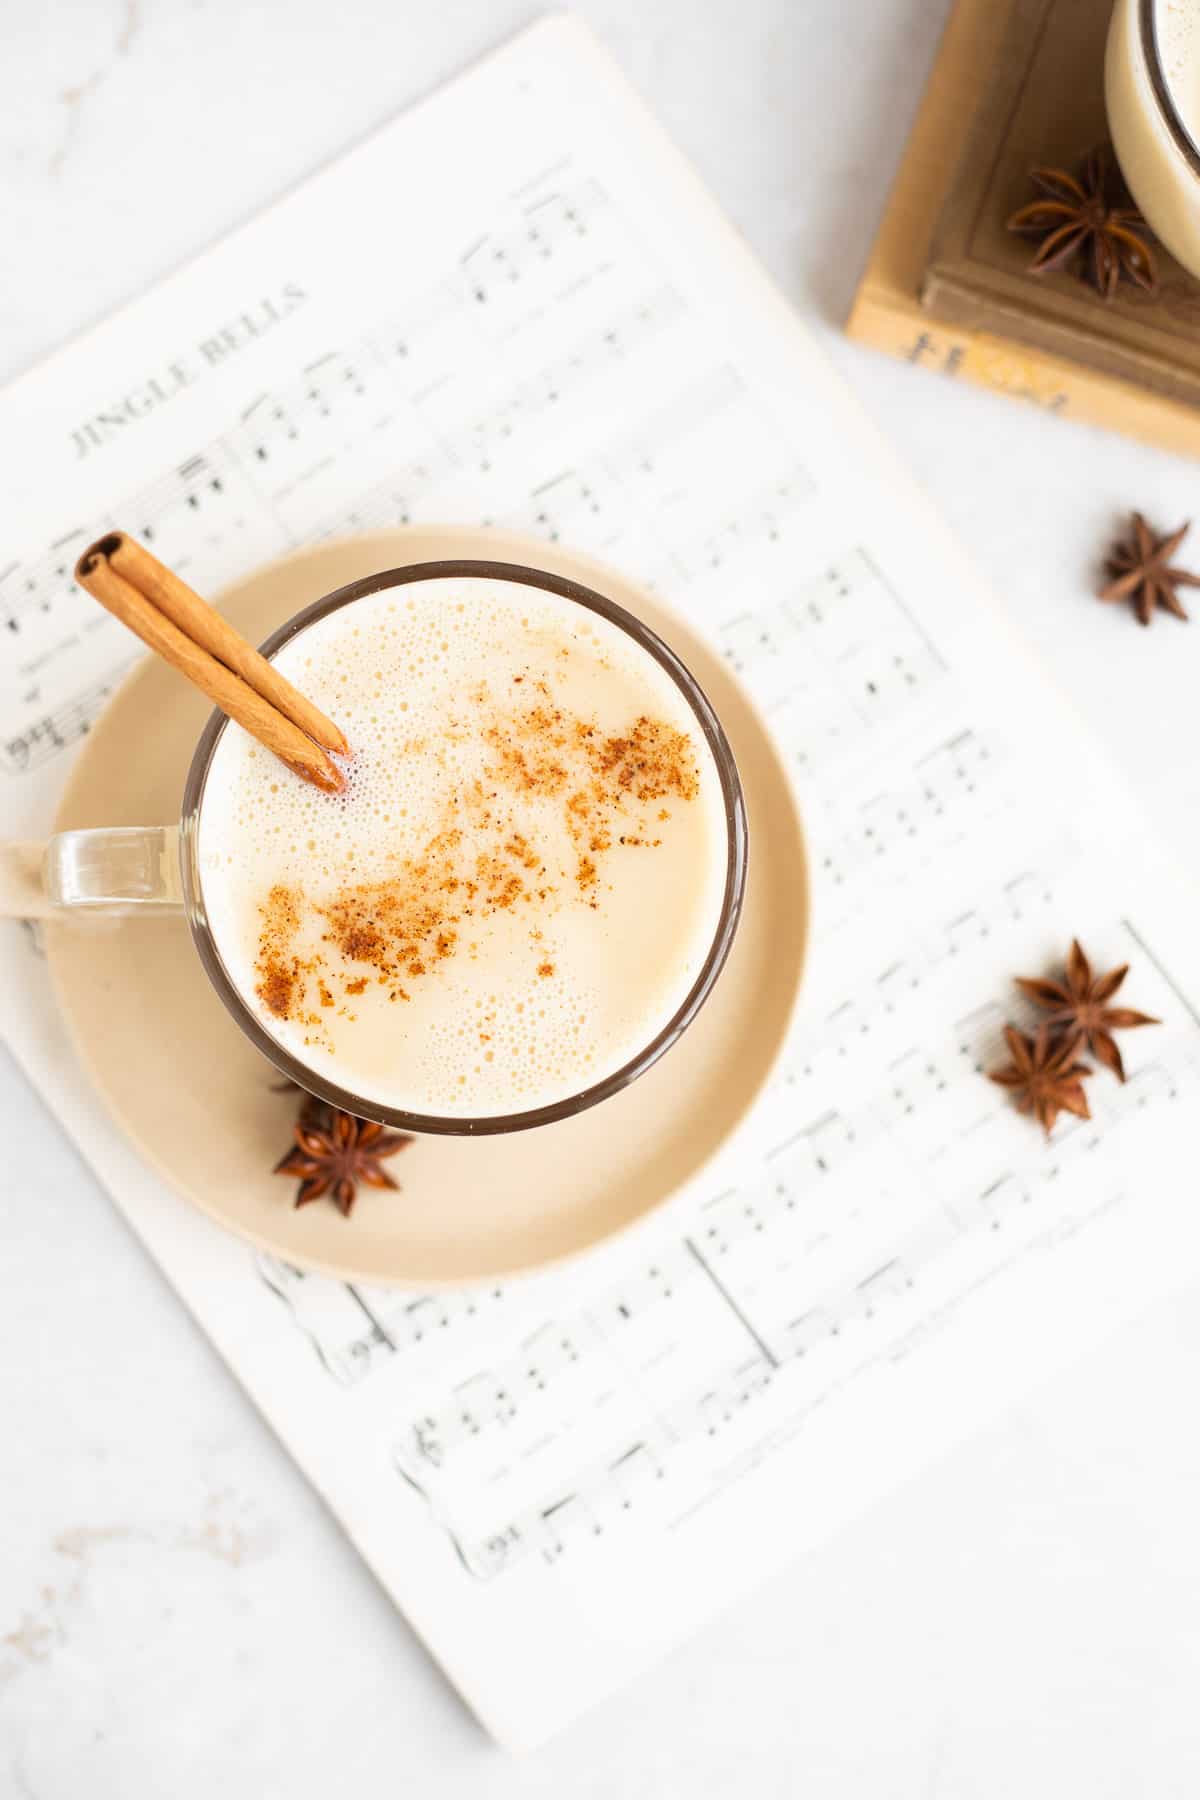 a mug of dairy free eggnog with a cinnamon stick on a sheet of music.